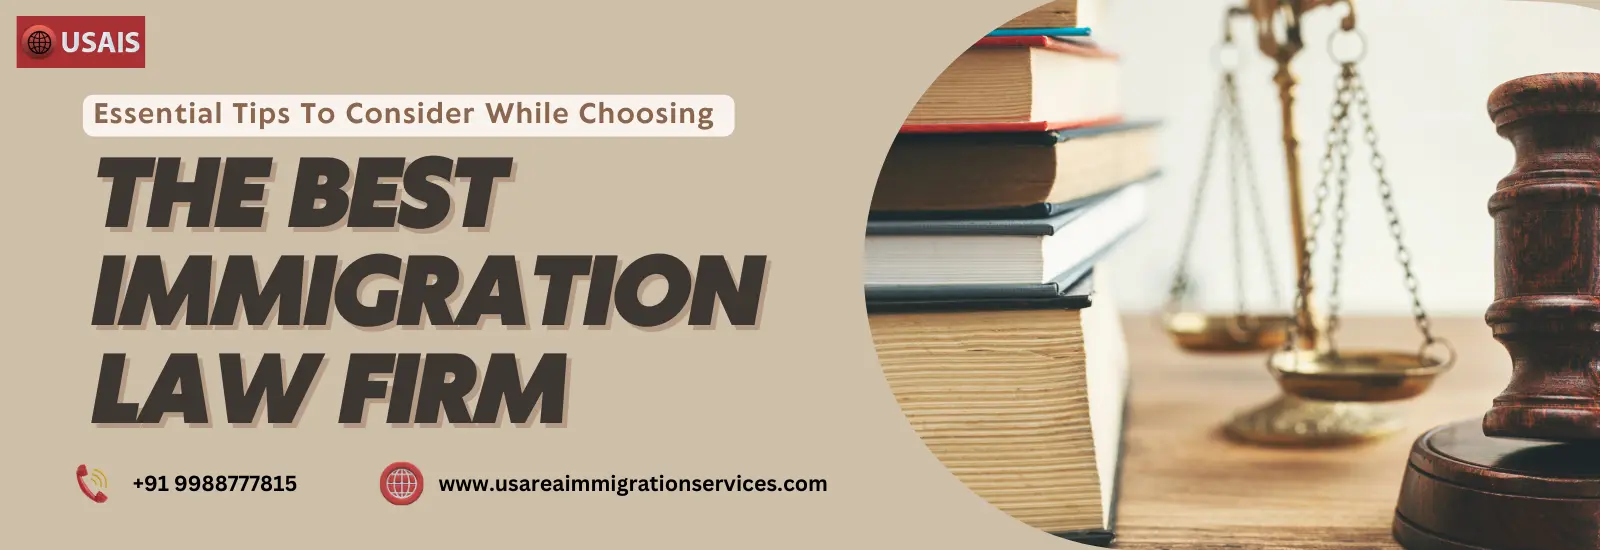 Essential-Tips-To-Consider-While-Choosing-The-Best-Immigration-Law-Firm